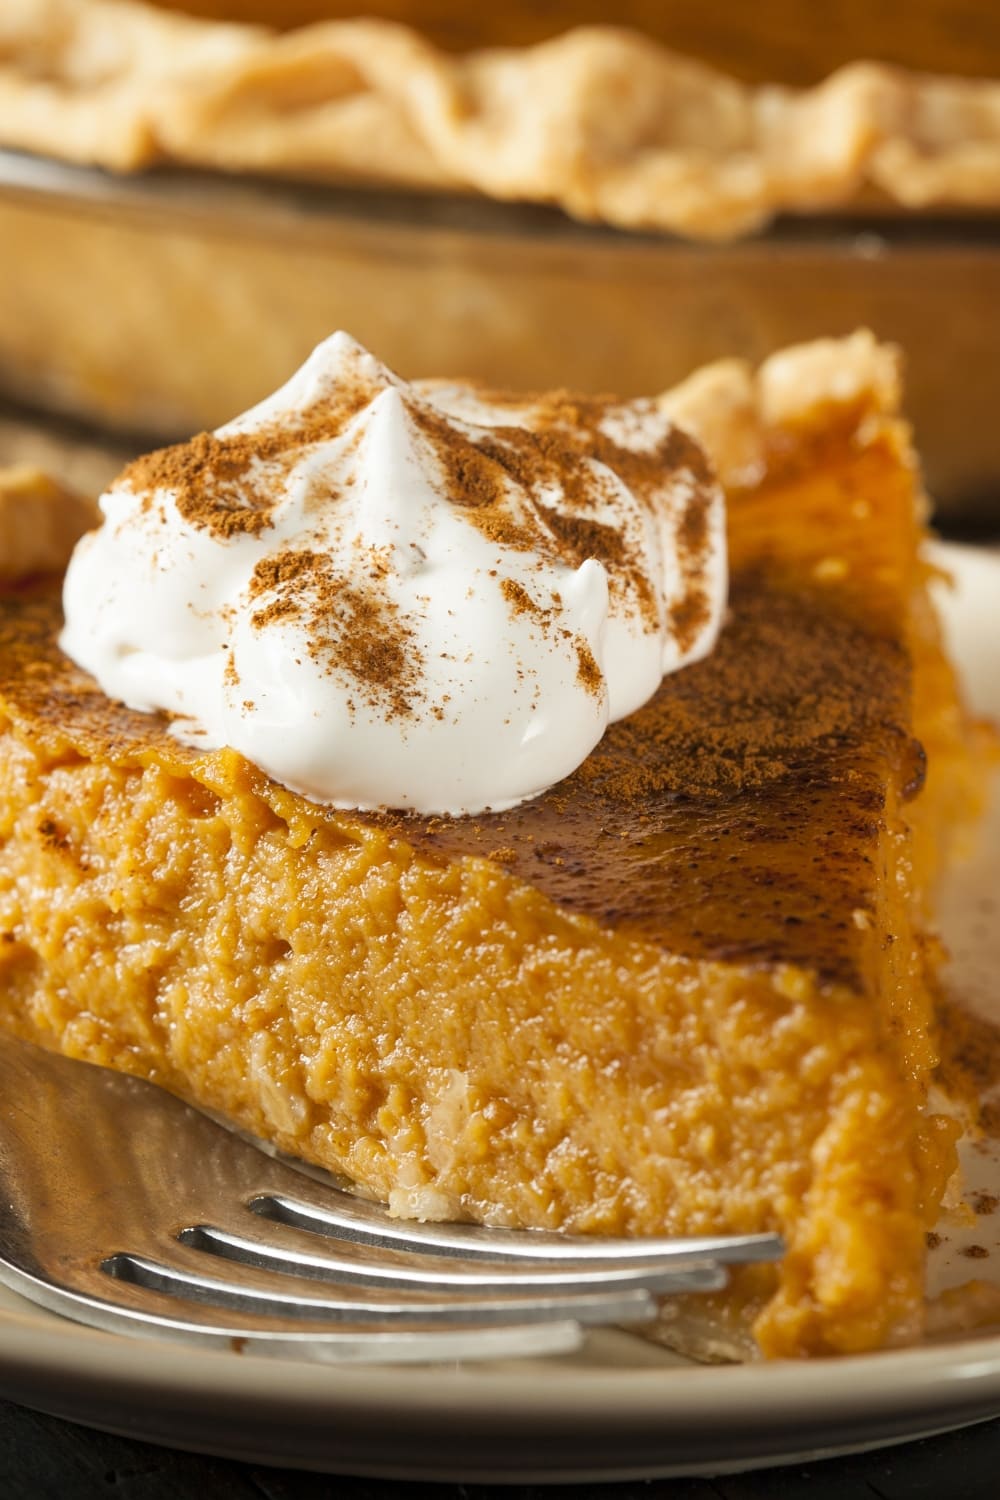 A Slice of Homemade Pumpkin Pie with Whipped Cream and Cinnamon Powder on Top Served on a Brown Plate